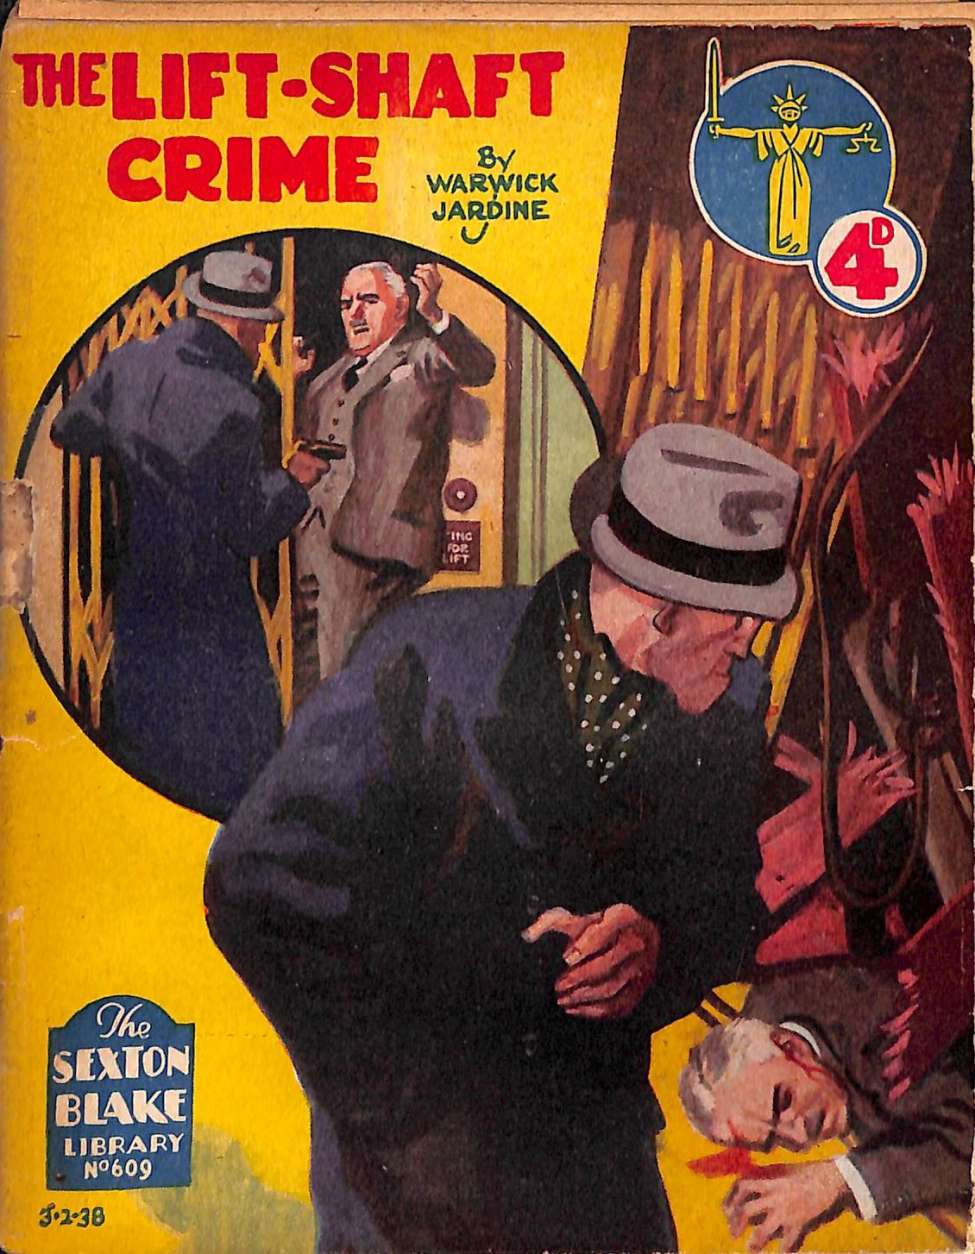 Book Cover For Sexton Blake Library S2 609 - The Lift Shaft Crime